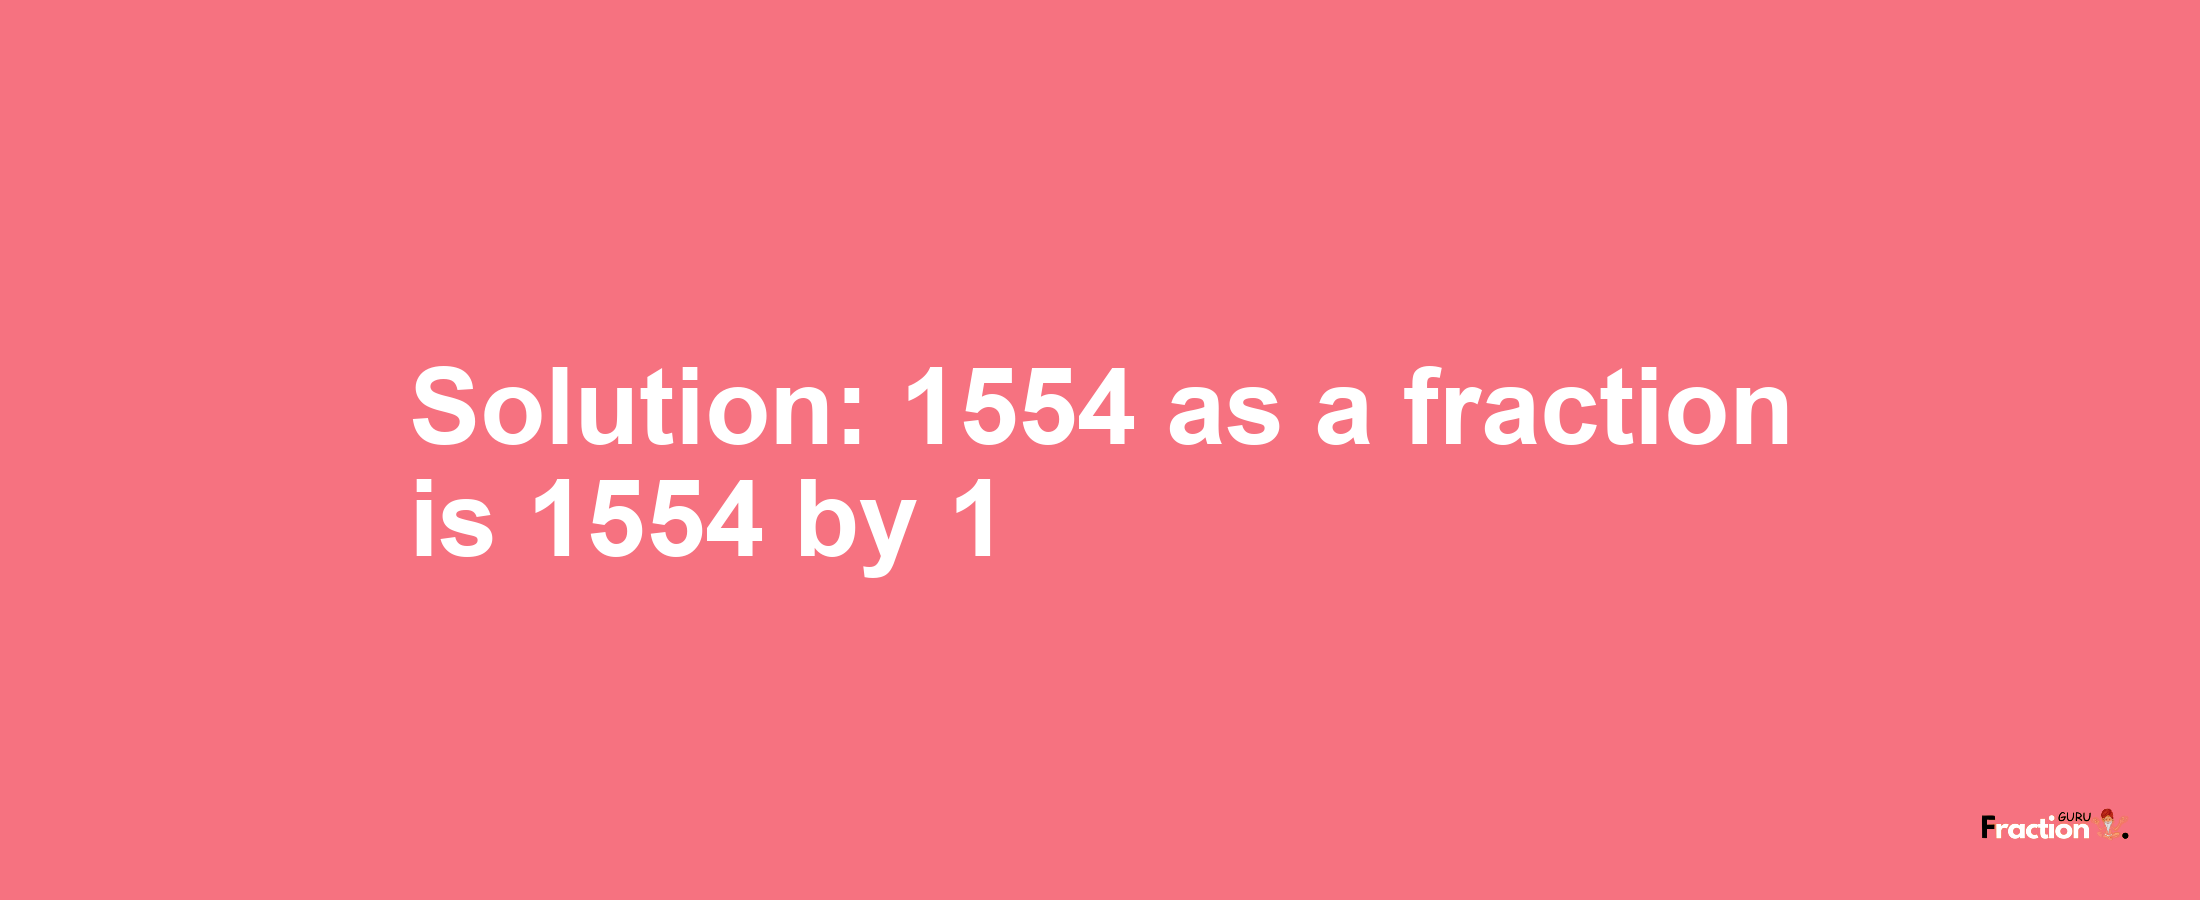 Solution:1554 as a fraction is 1554/1